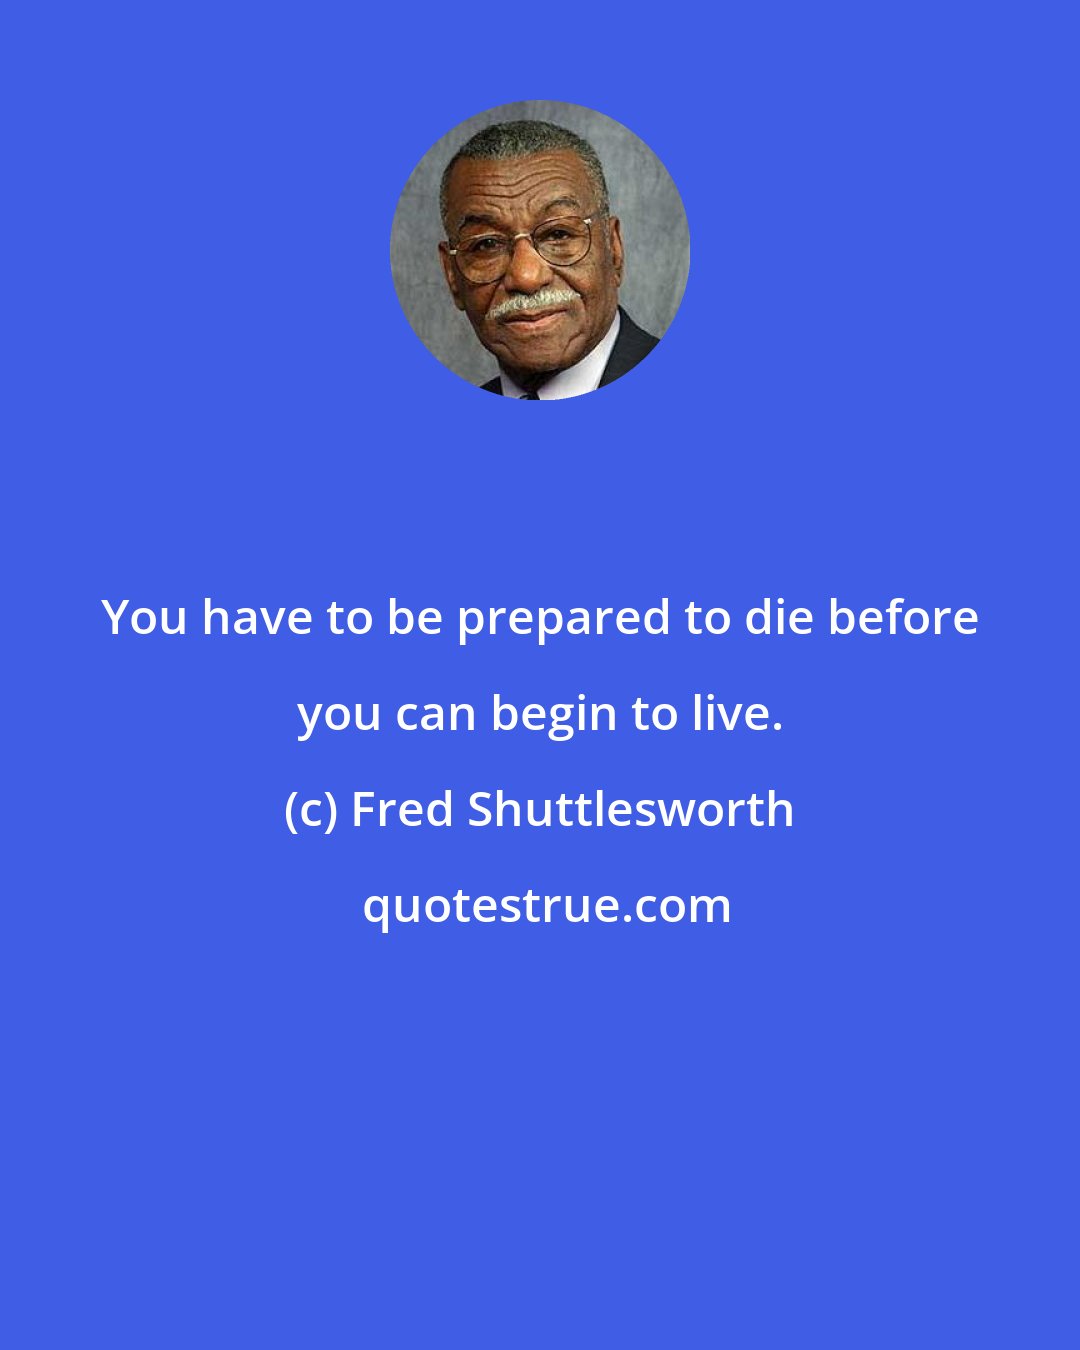 Fred Shuttlesworth: You have to be prepared to die before you can begin to live.